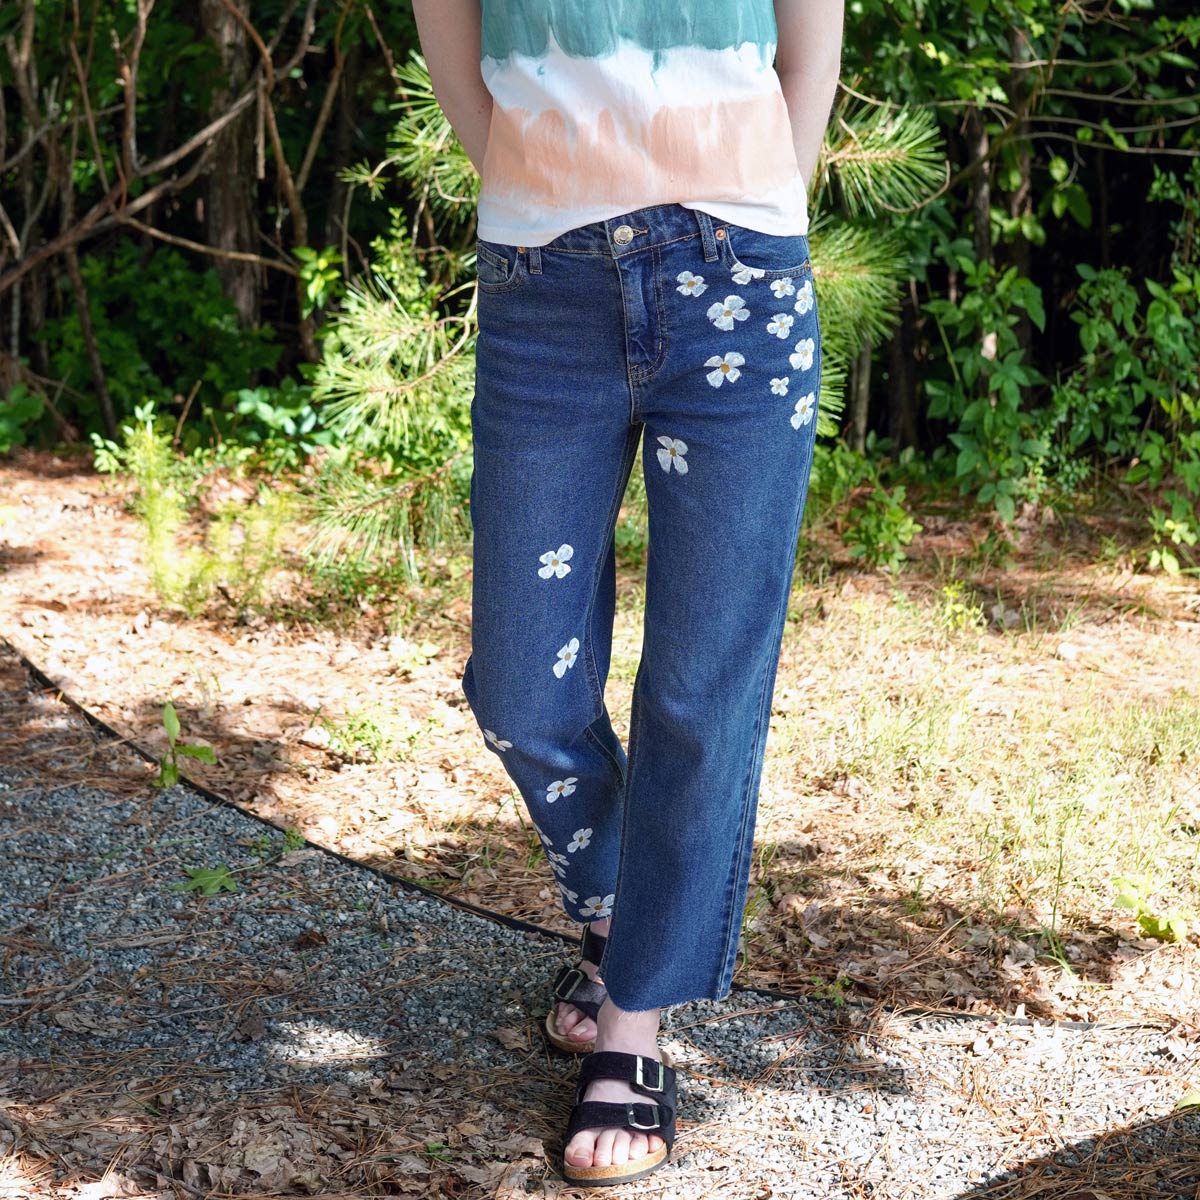 jeans with painted flowers